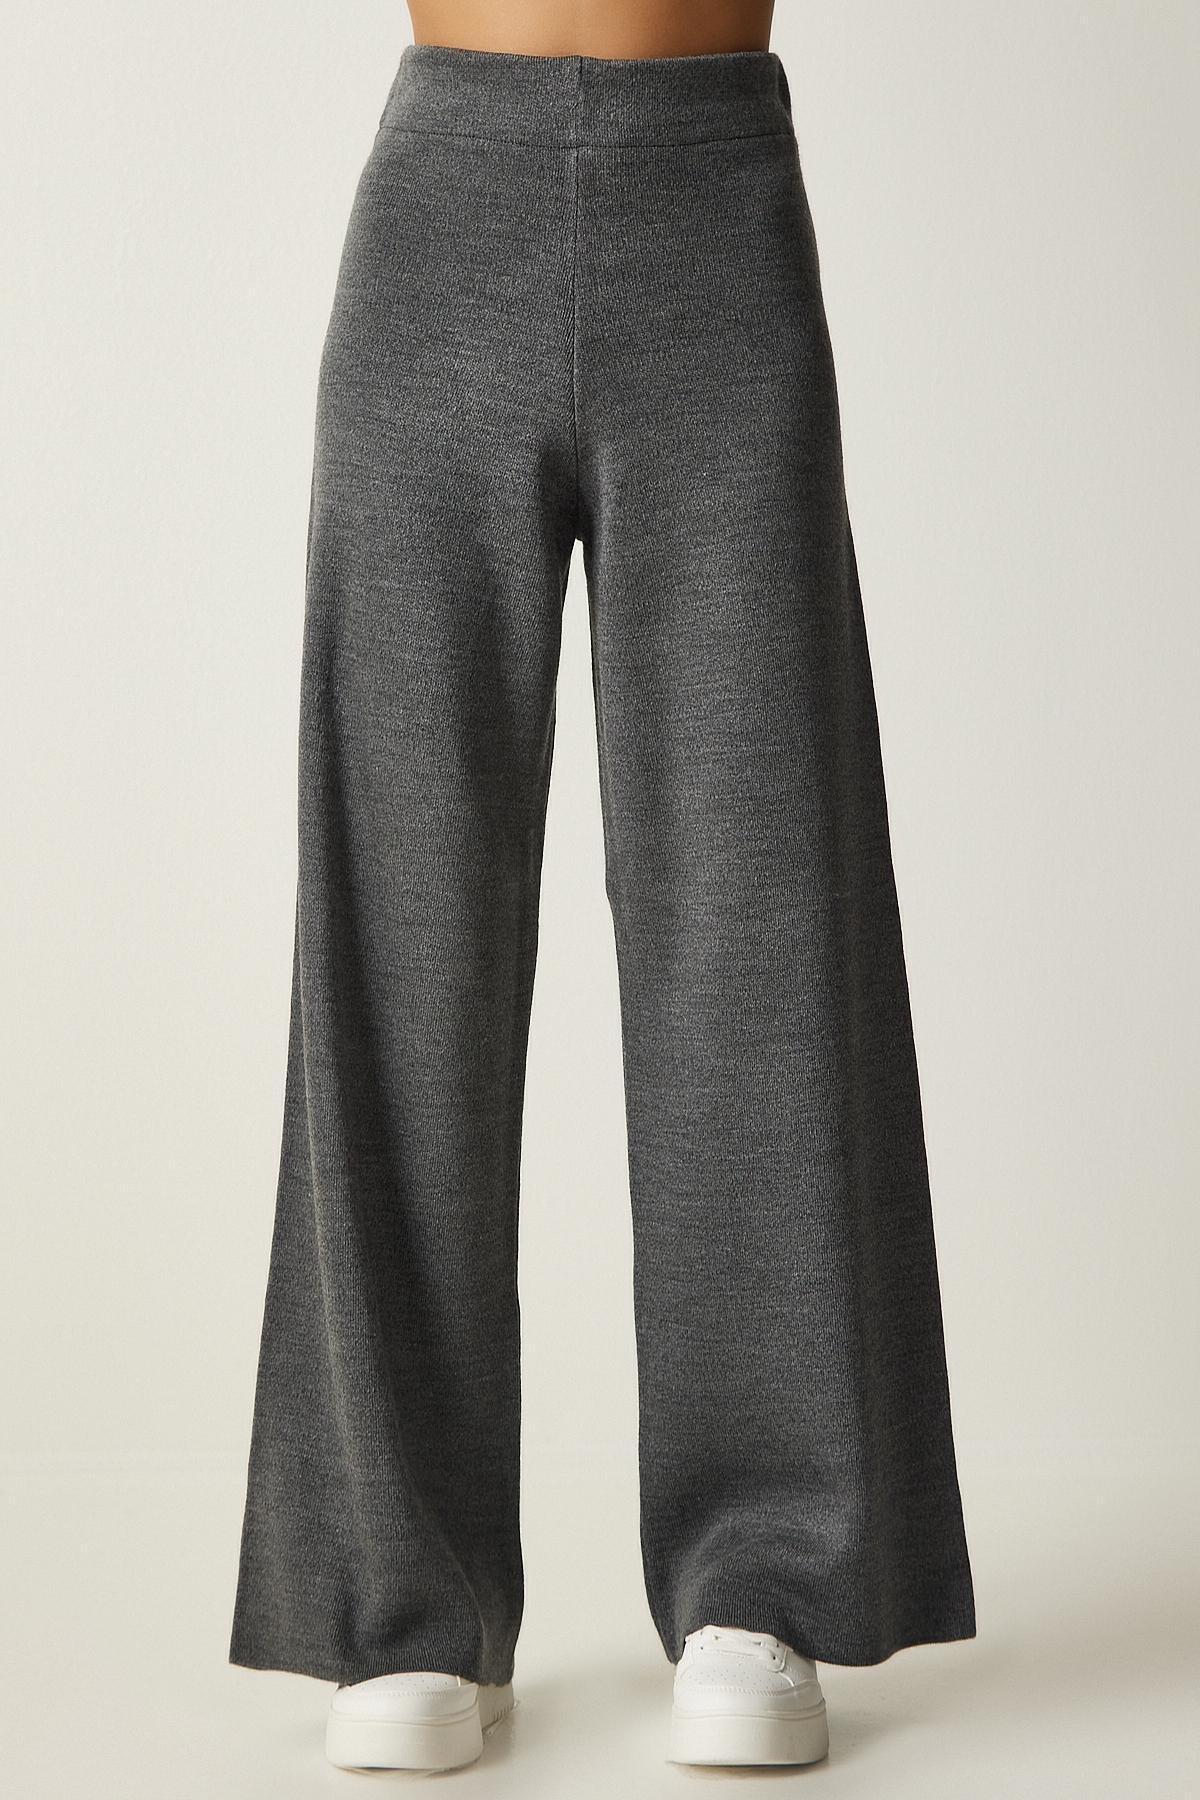 Happiness Istanbul - Grey Wide Leg Thick Knitted Trousers